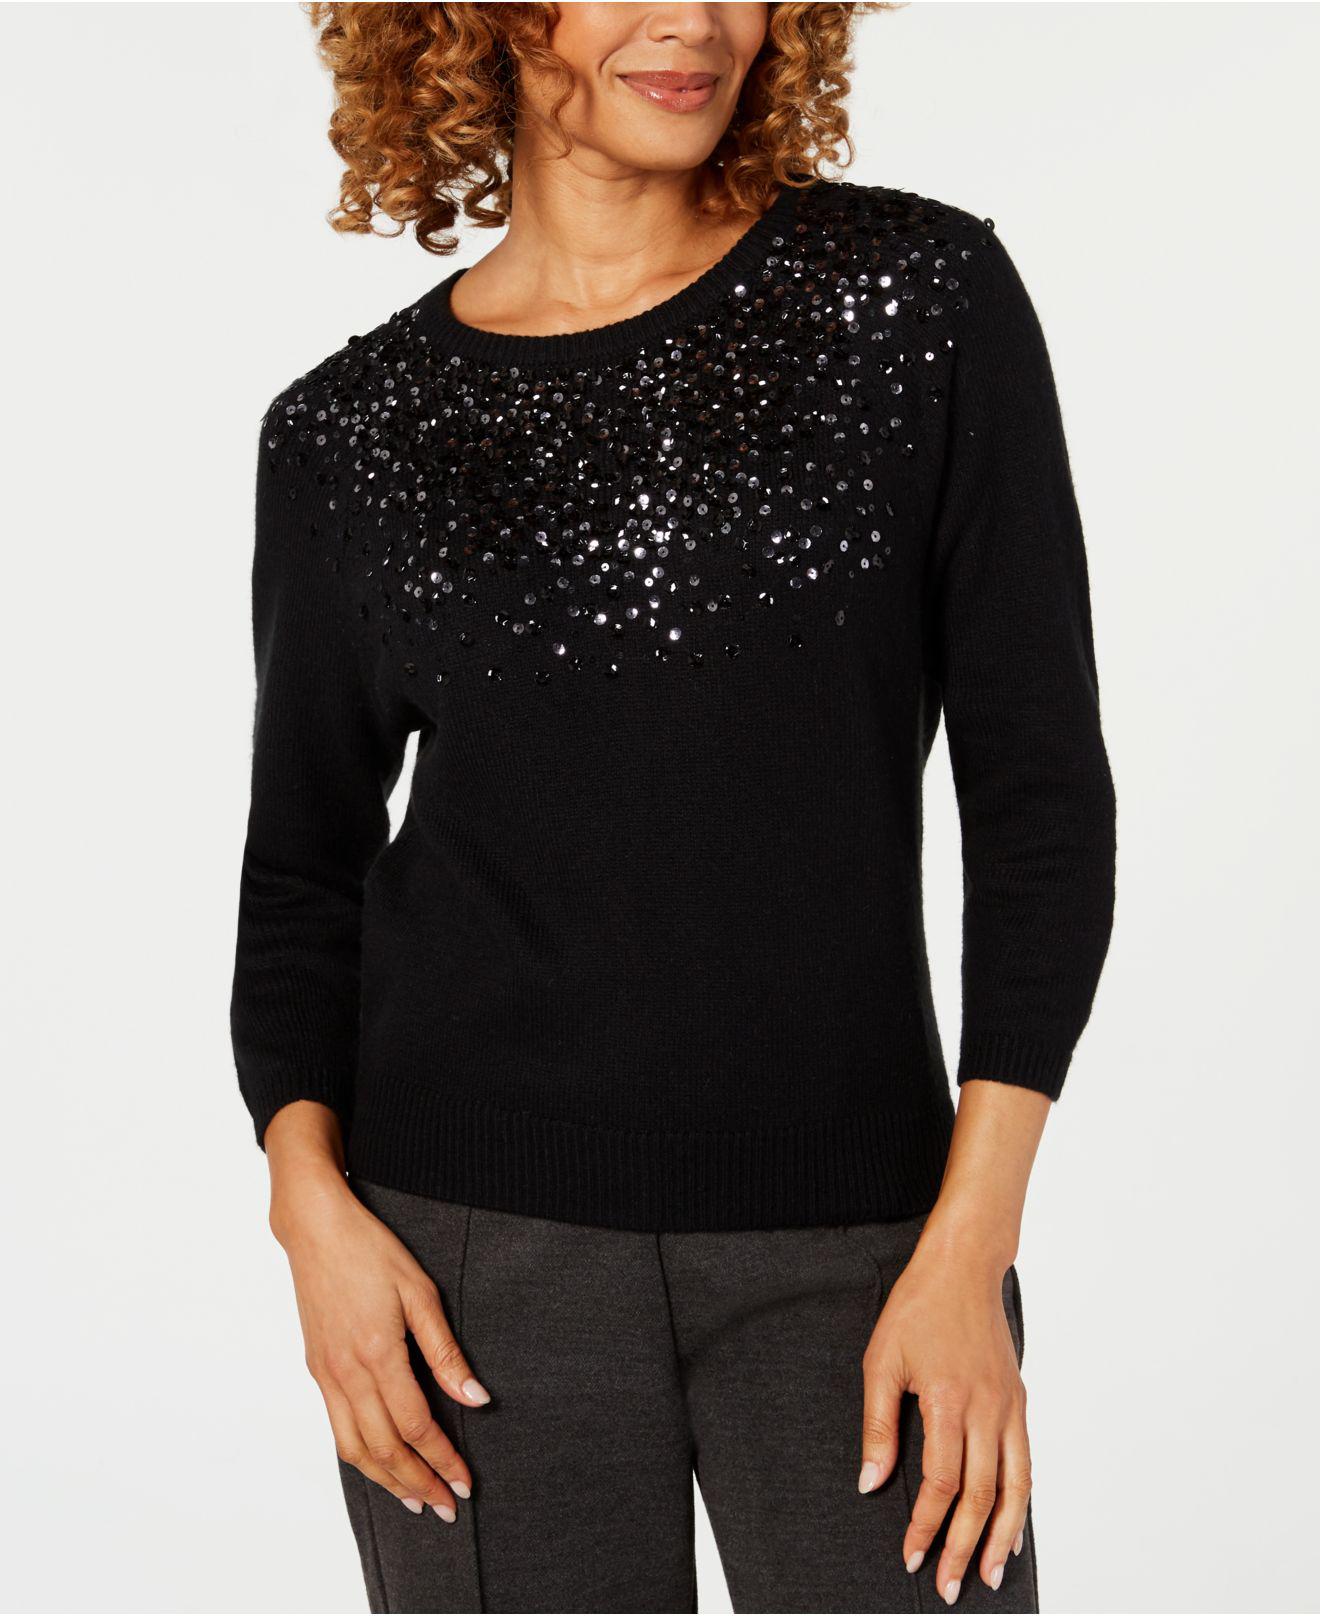 Lyst - Cece Sequin-embellished Sweater in Black - Save 61%